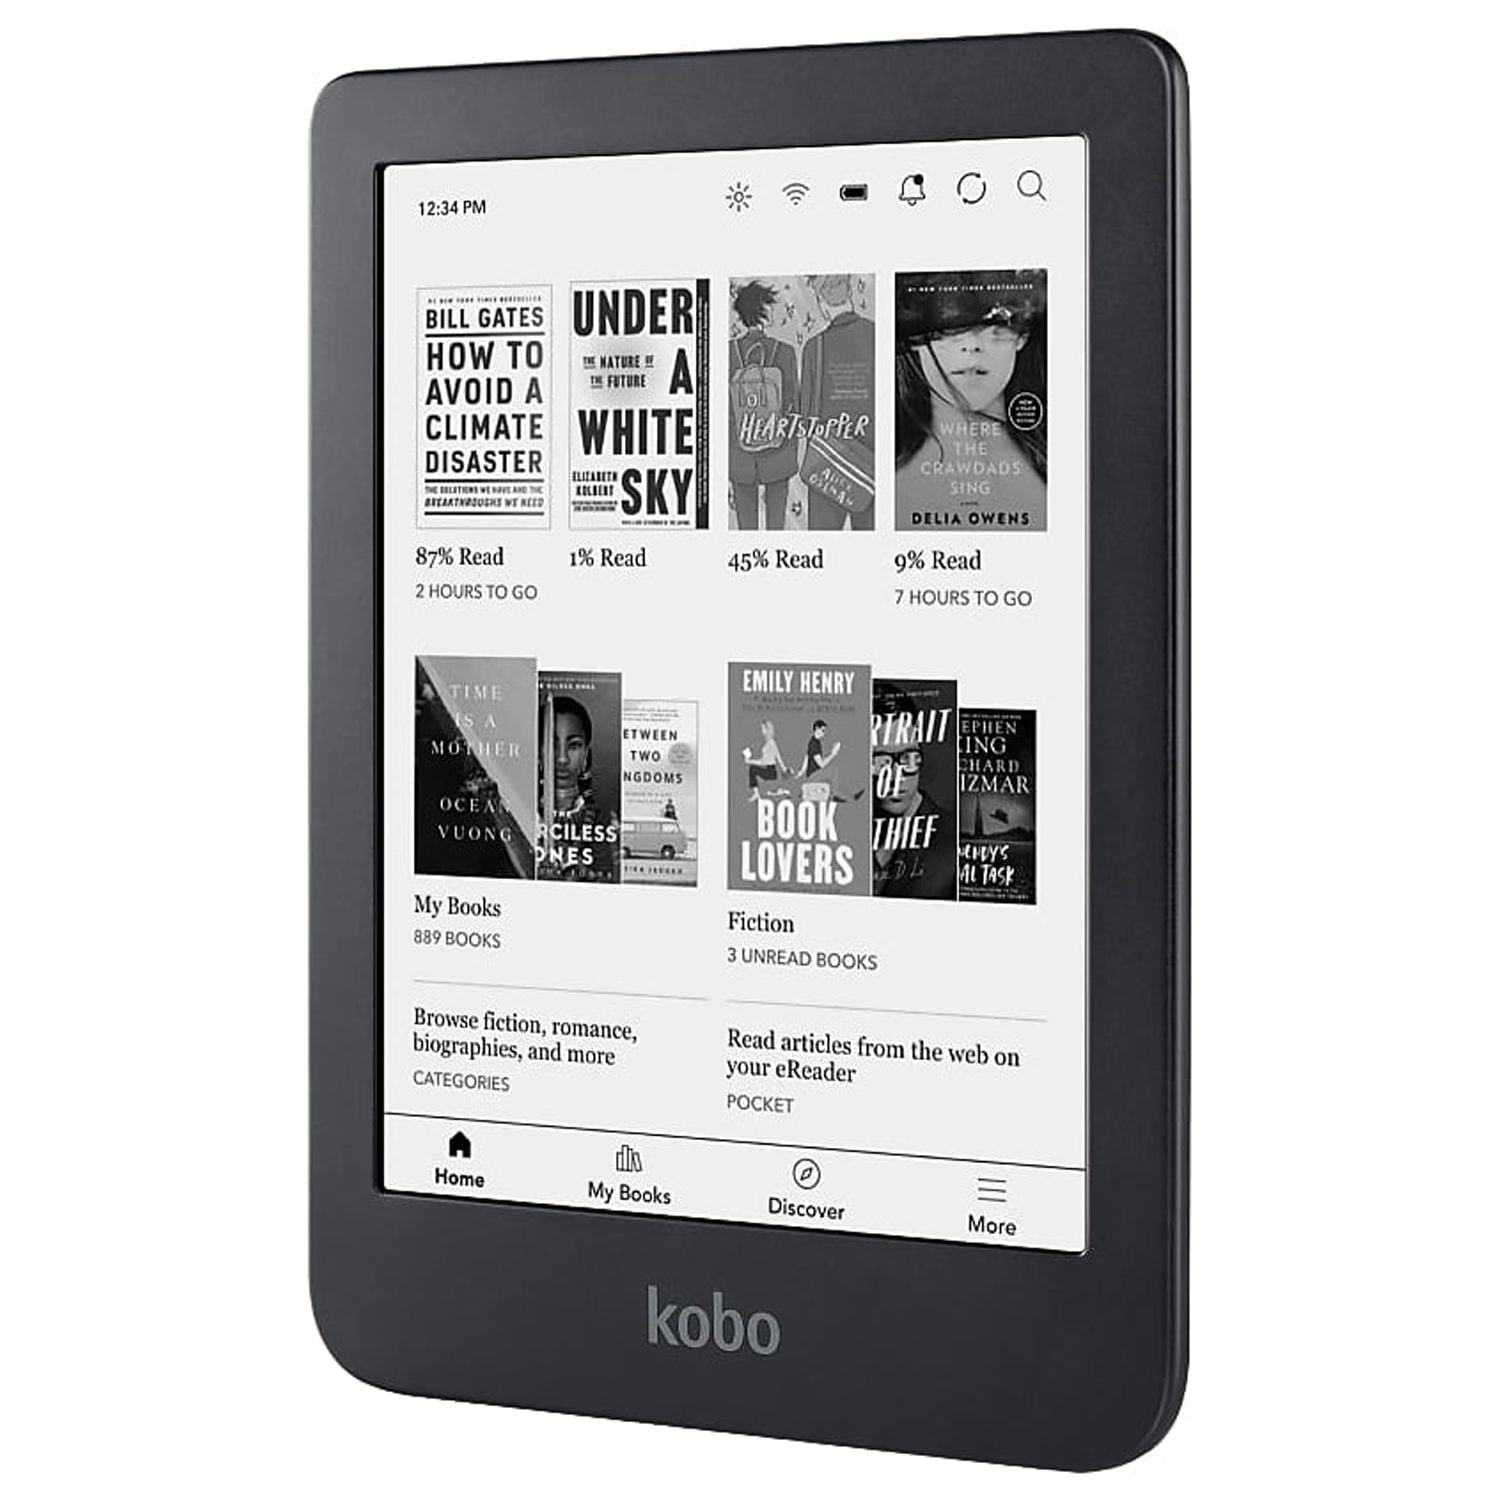 Kobo Clara 2E Review: Compact EReader Made From Recycled Plastic - Little  Day Out